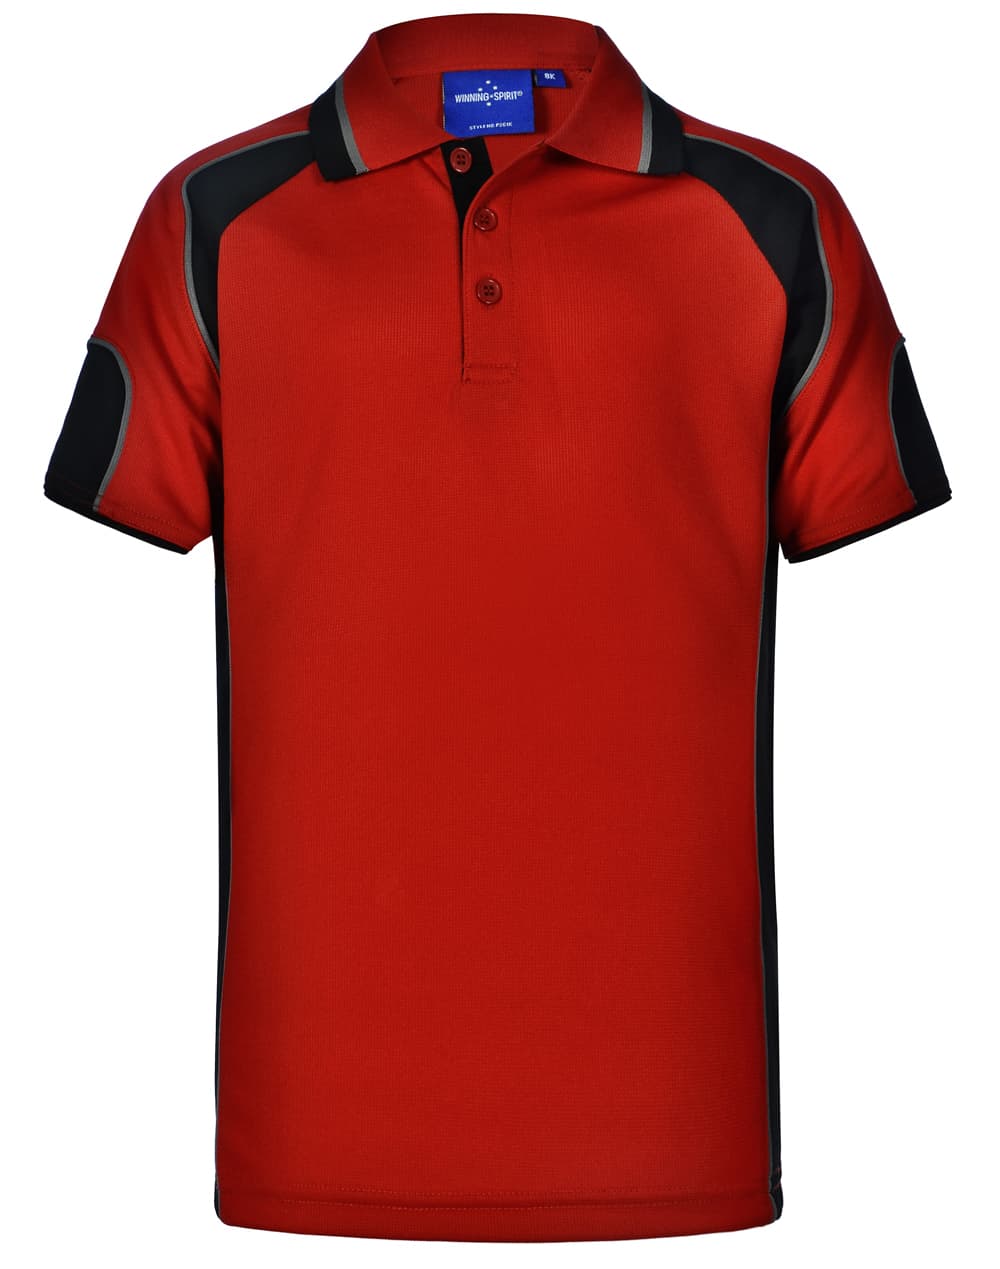 Kids CoolDry Contrast Short Sleeve Polo with Sleeve Panels PS61K | Red/Black